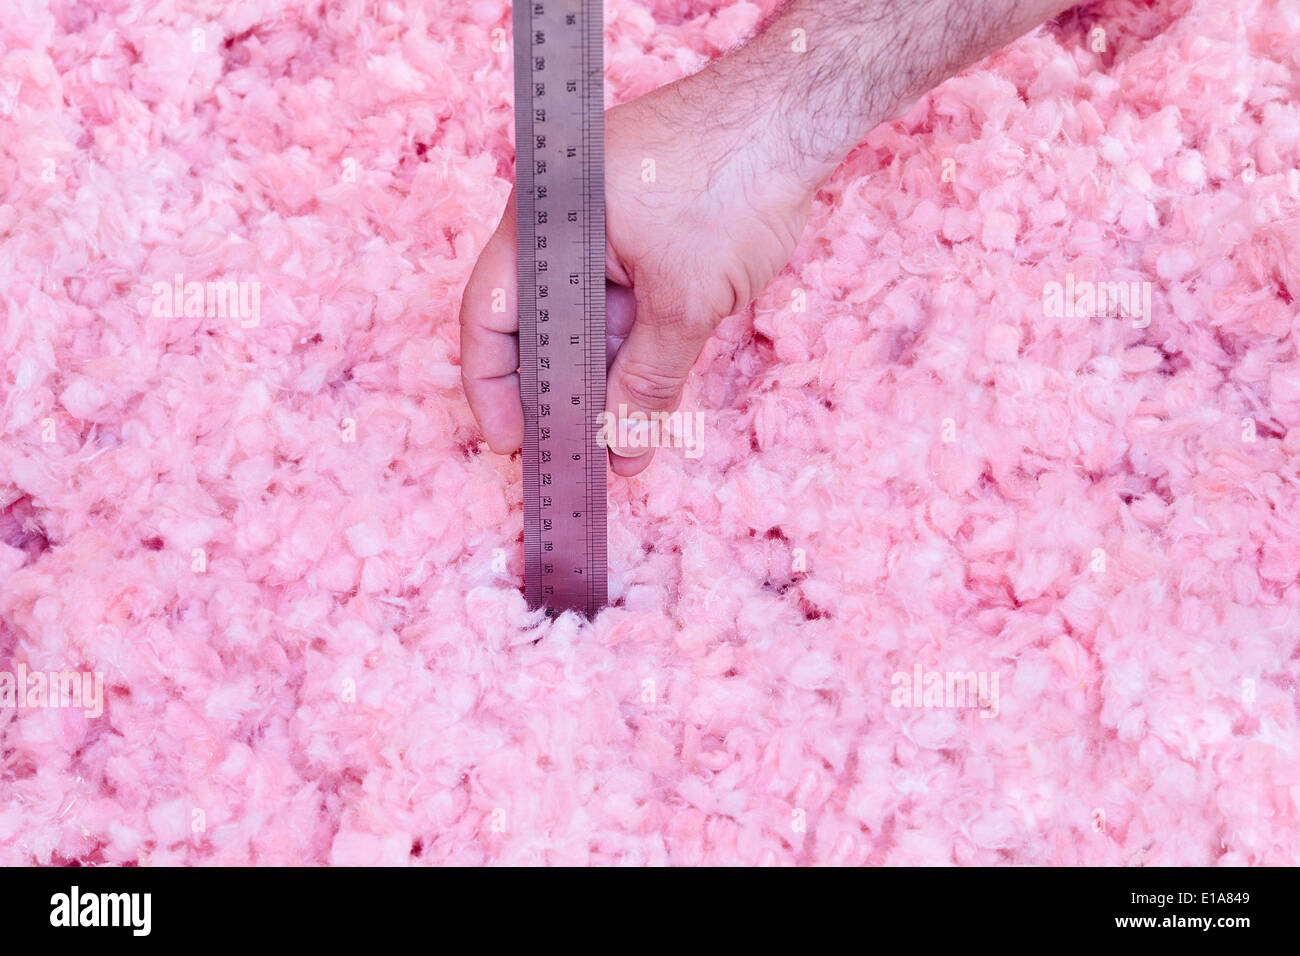 Homeowner checking the energy efficiency of their house by measuring the thickness of fiberglass insulation in the attic Stock Photo